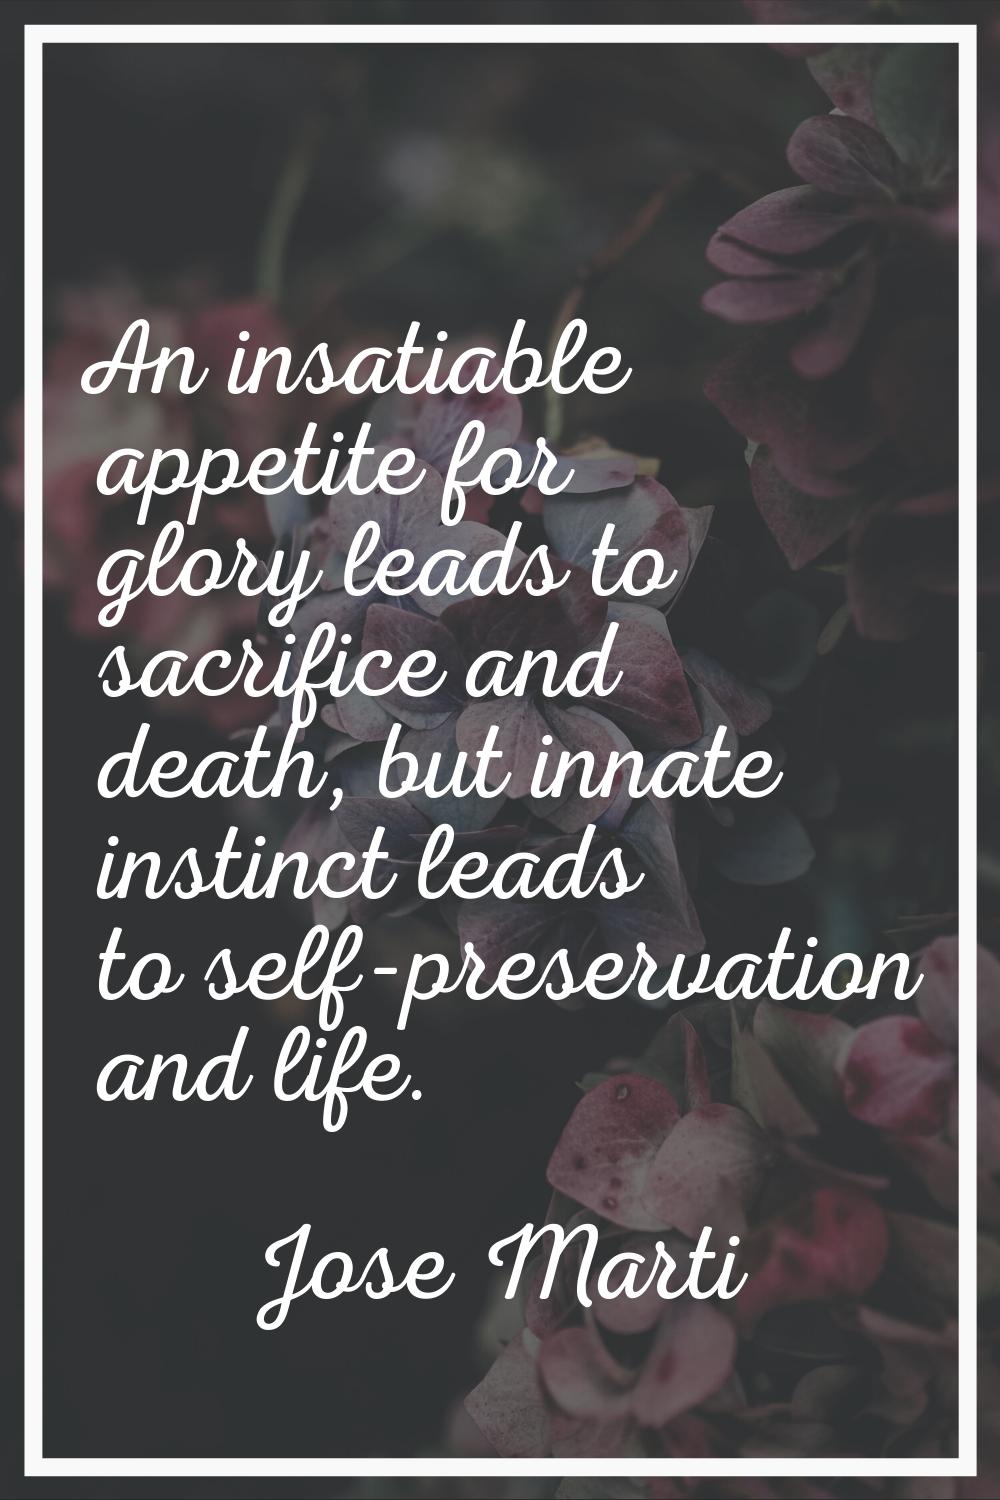 An insatiable appetite for glory leads to sacrifice and death, but innate instinct leads to self-pr